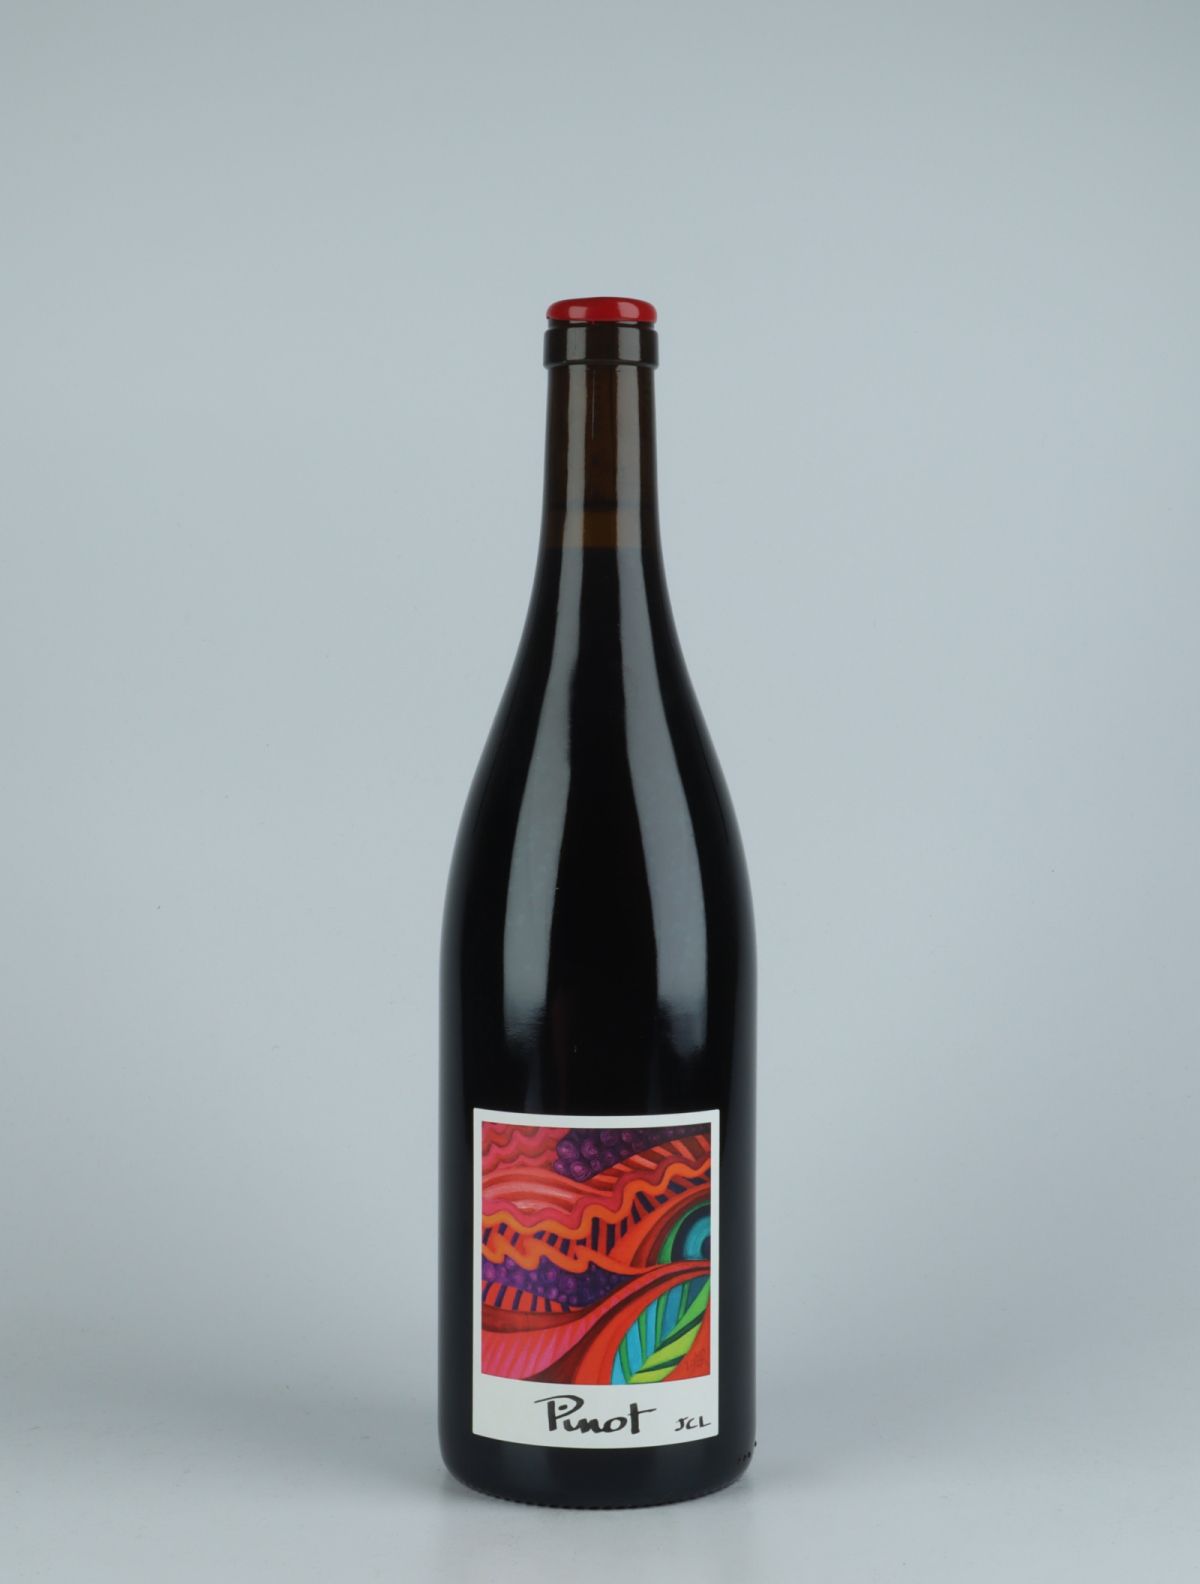 A bottle 2020 Pinot Red wine from Jean-Claude Lapalu, Beaujolais in France